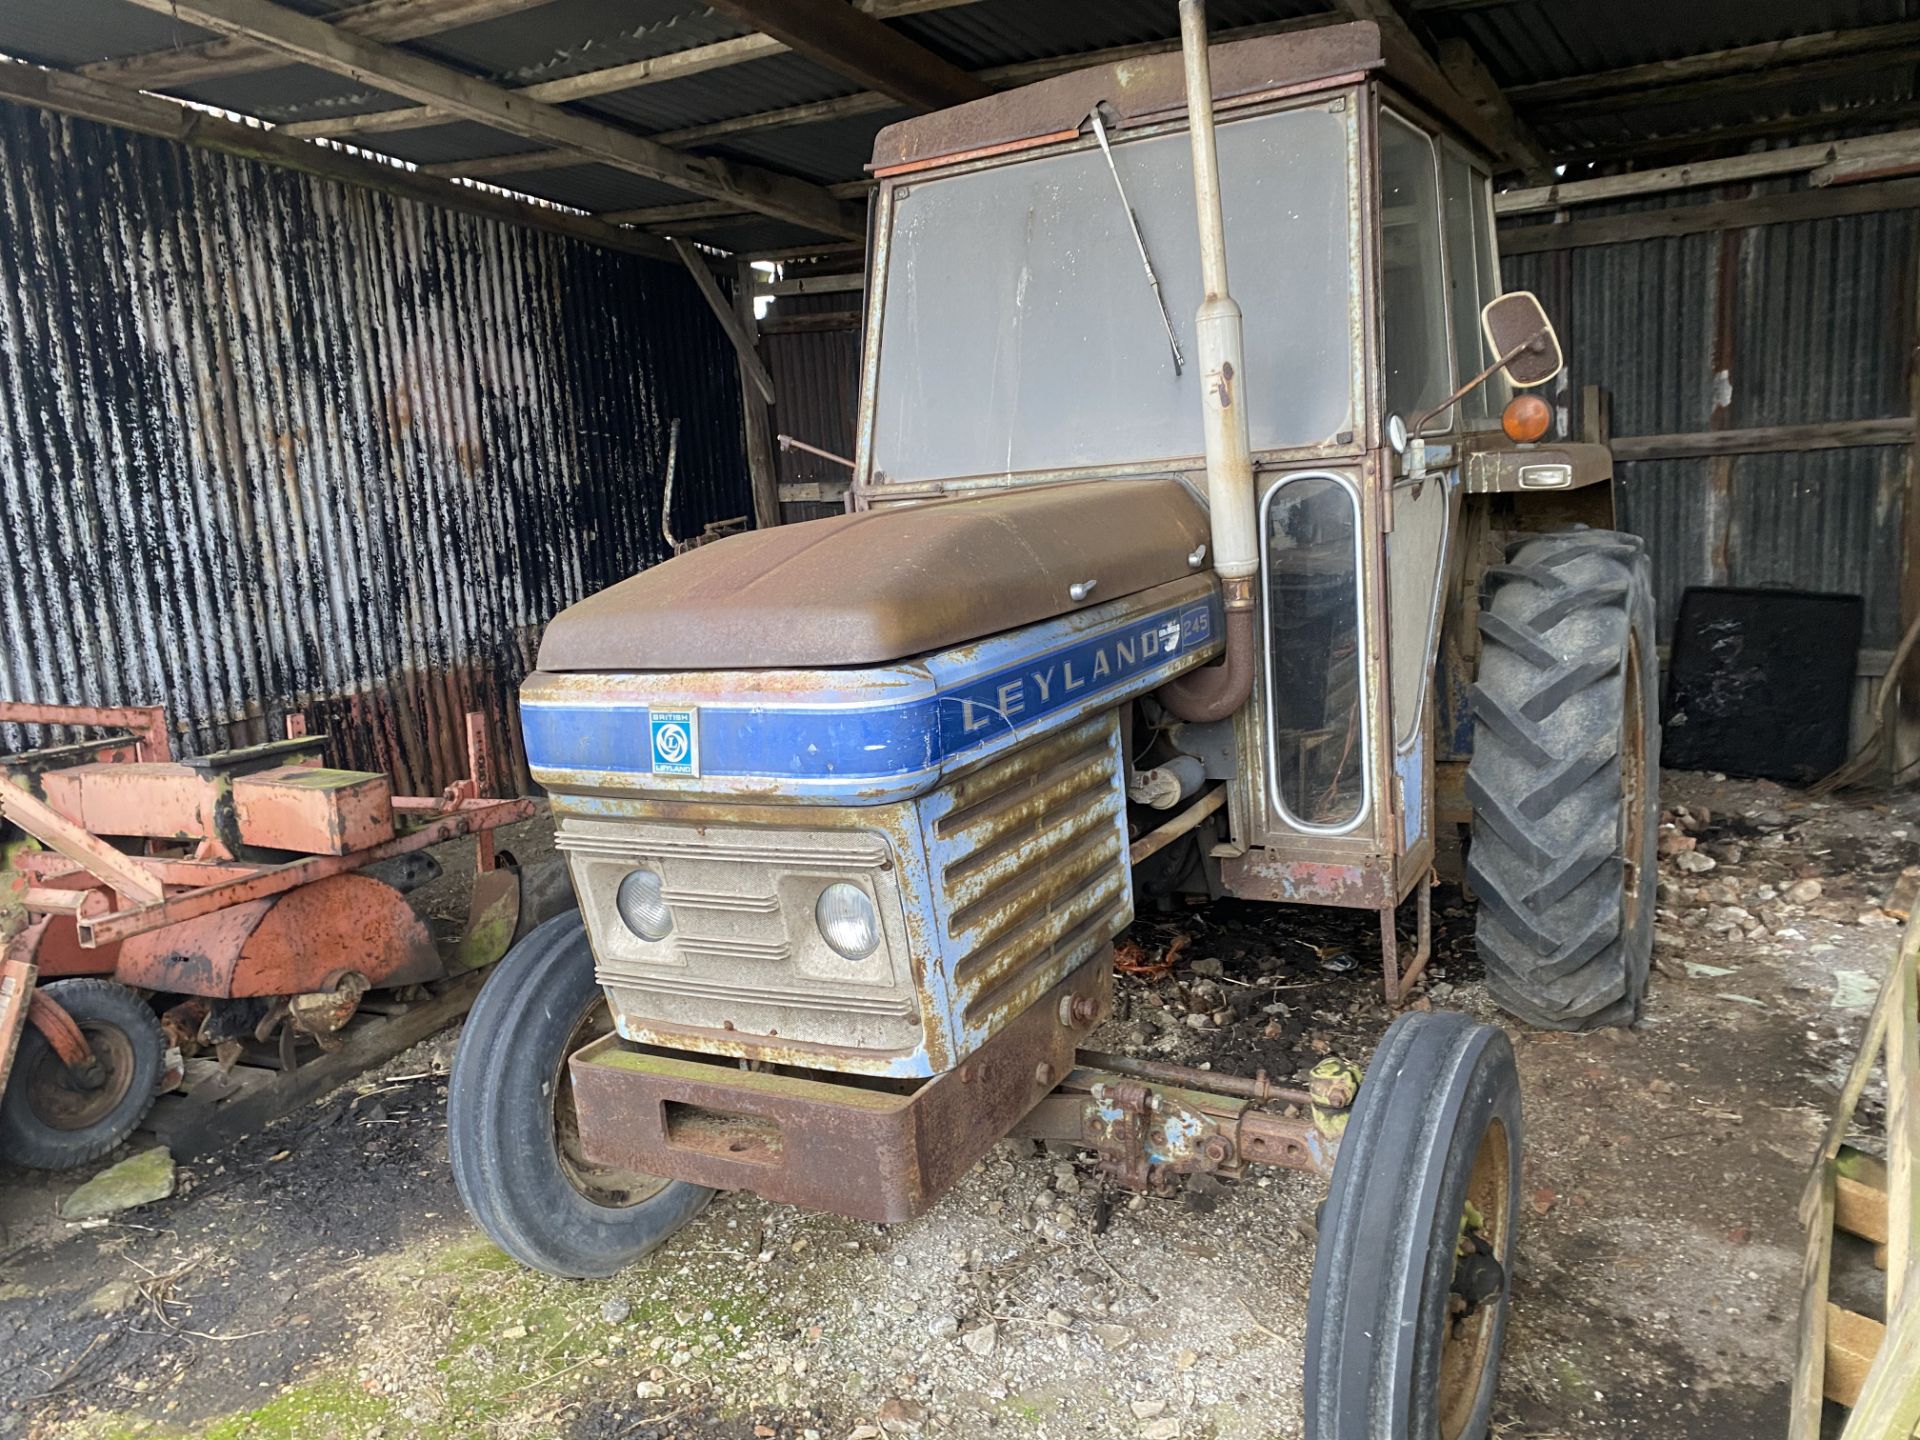 (75) Leyland 245 2wd tractor, 8,500 hrs, Reg KCT 534P, one owner from new, manual in office - Image 3 of 4